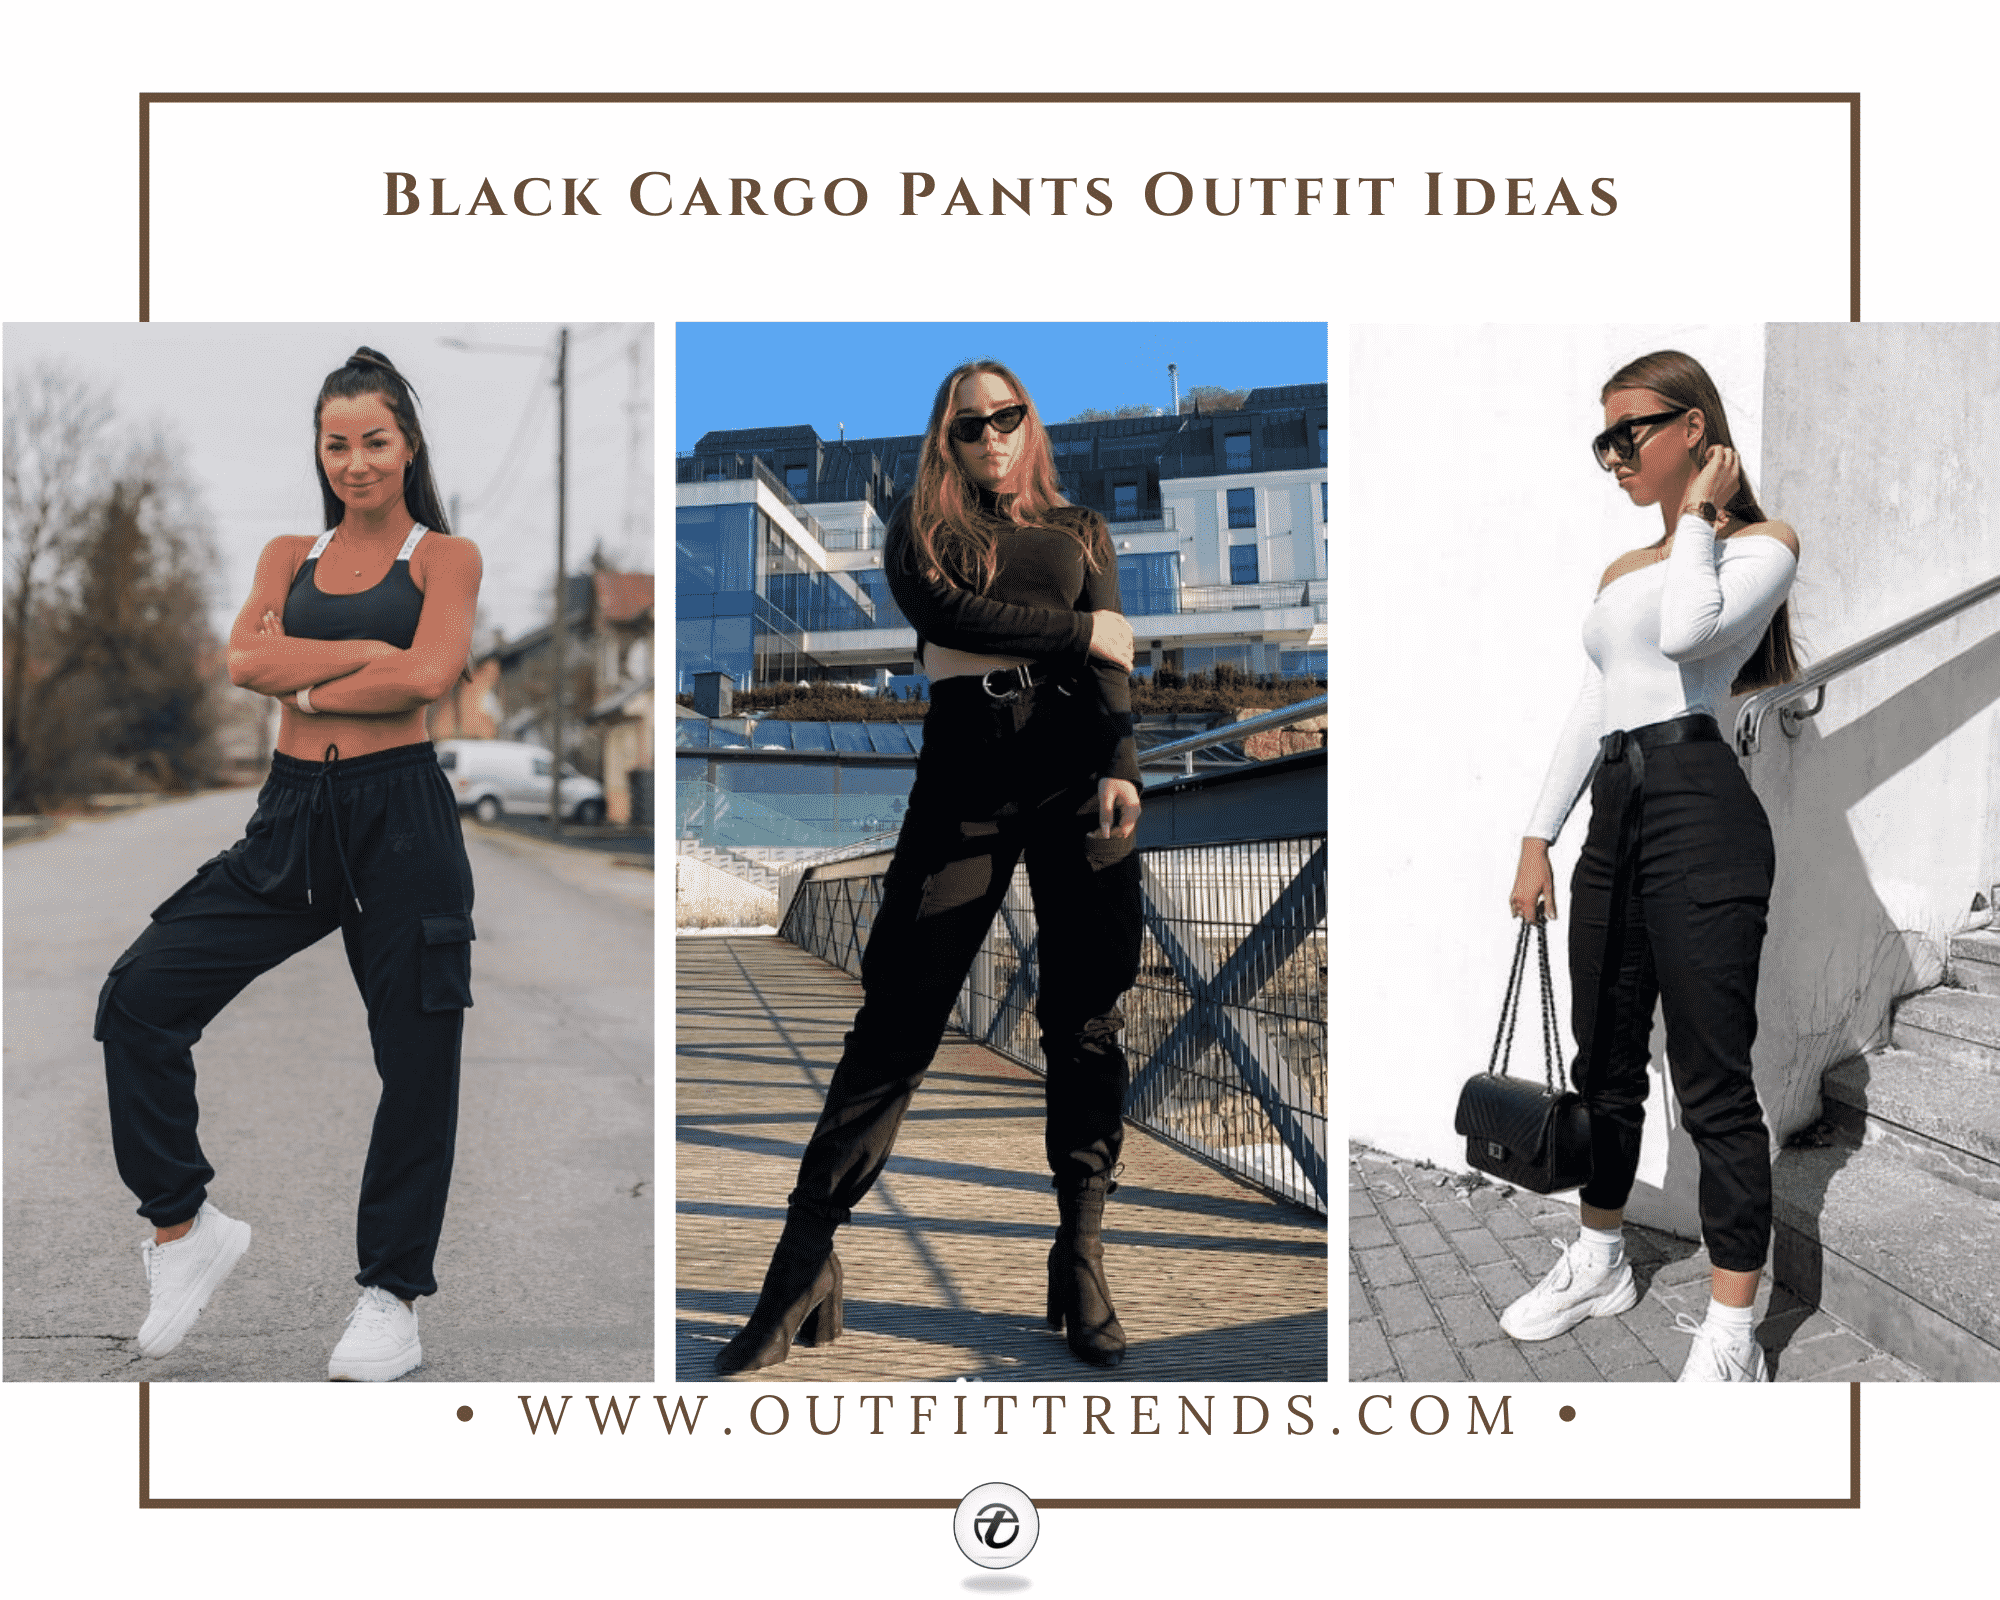 The Best Ways to Wear Cargo Pants for Women Over 50 - fountainof30.com